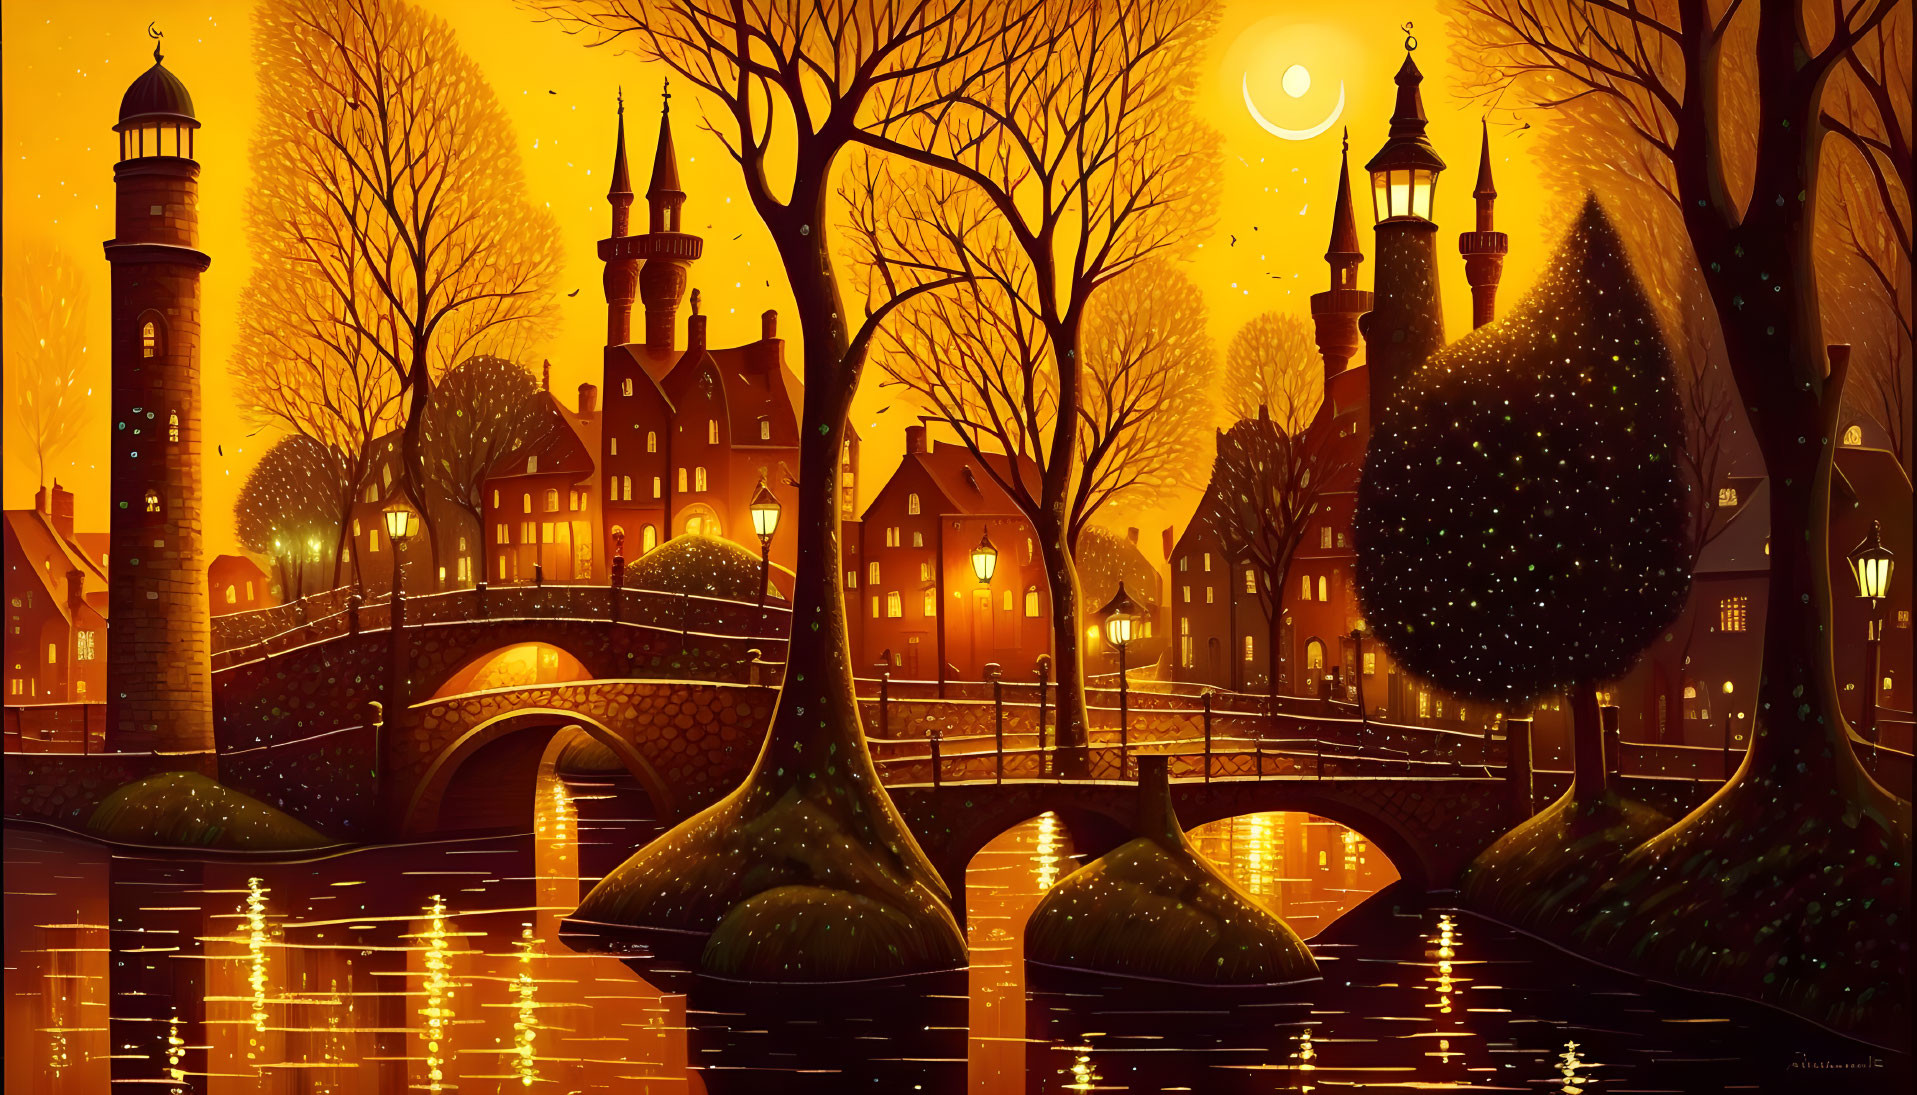 Golden-hued autumn evening scene with canal, bridges, lighthouses, and charming buildings under moon